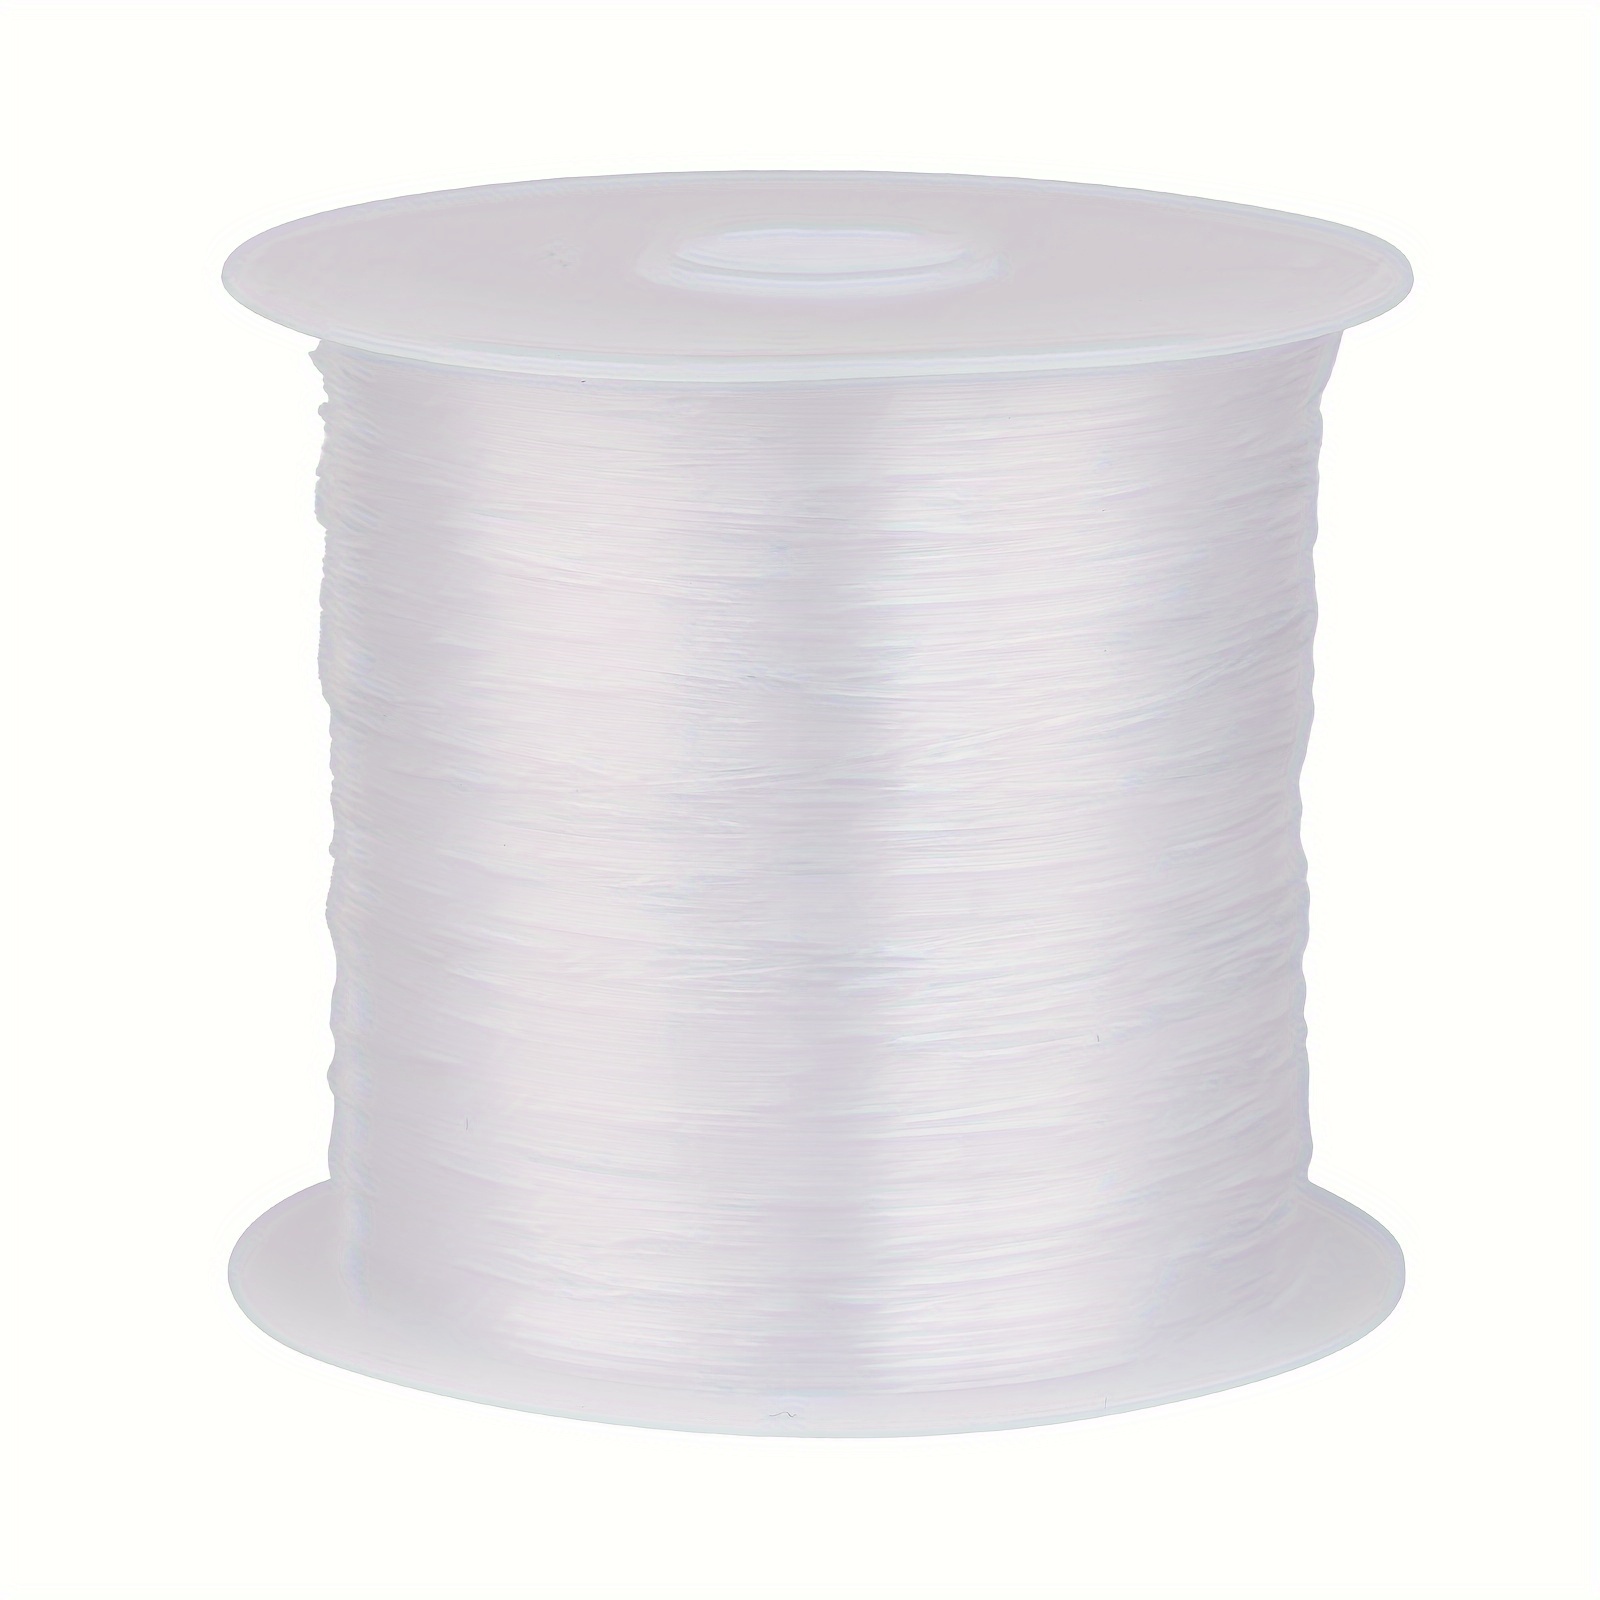 100m Clear Nylon Outdoor Fishing String Thread 1mm Dia. Boat/Cast Fishing  Line Hook Tying Tackle Gear Accessories 